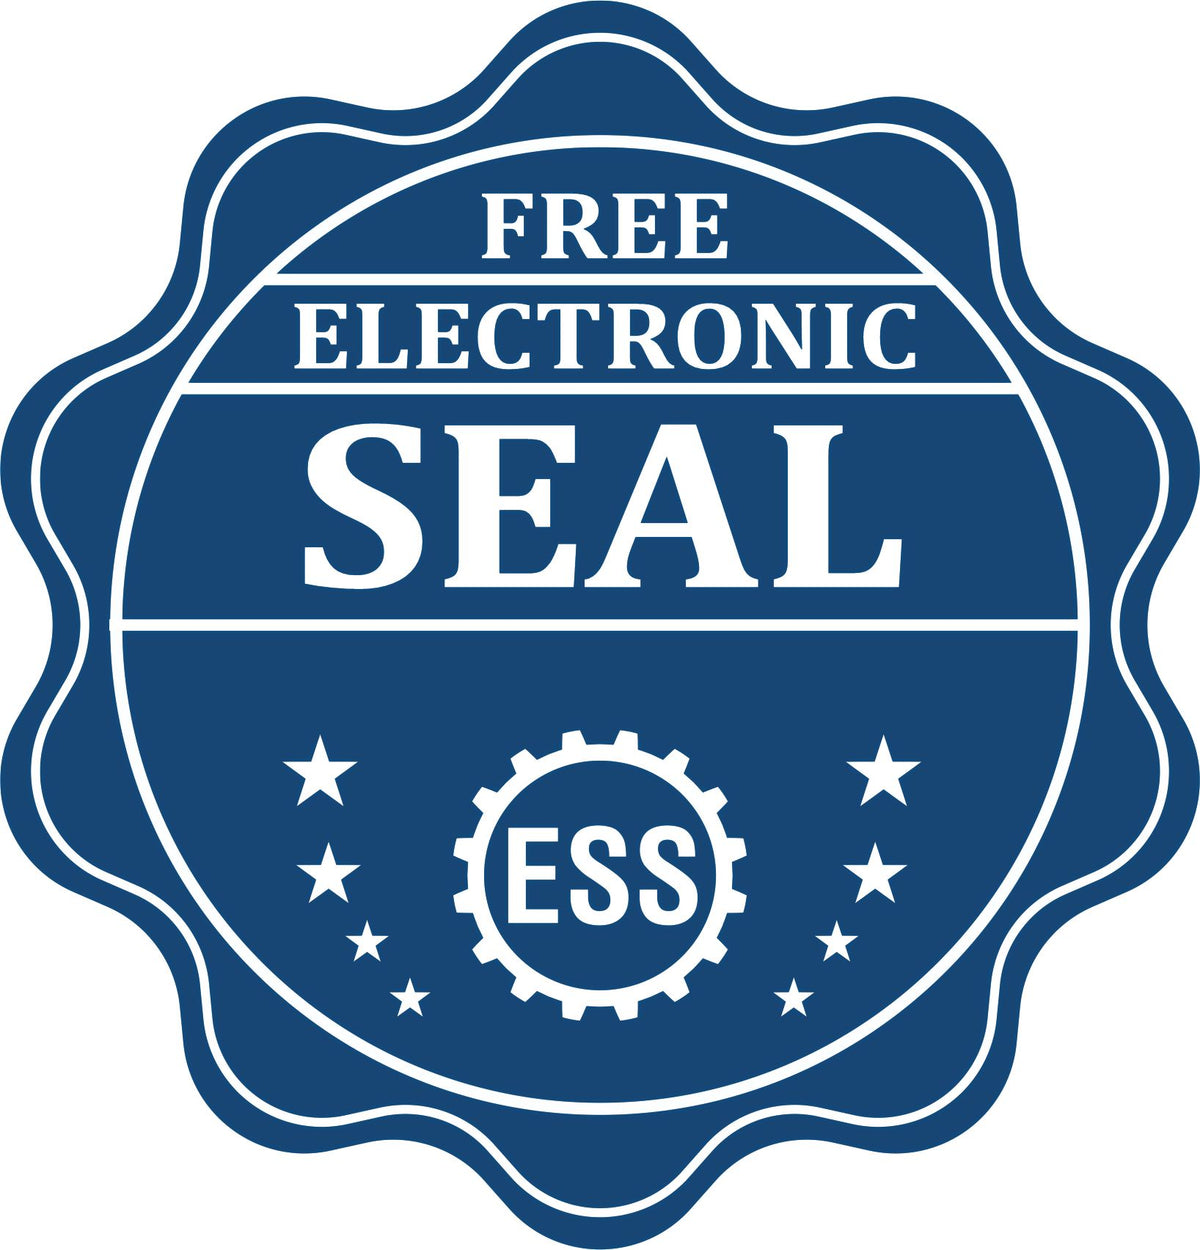 A badge showing a free electronic seal for the Hybrid Virginia Engineer Seal with stars and the ESS gear on the emblem.